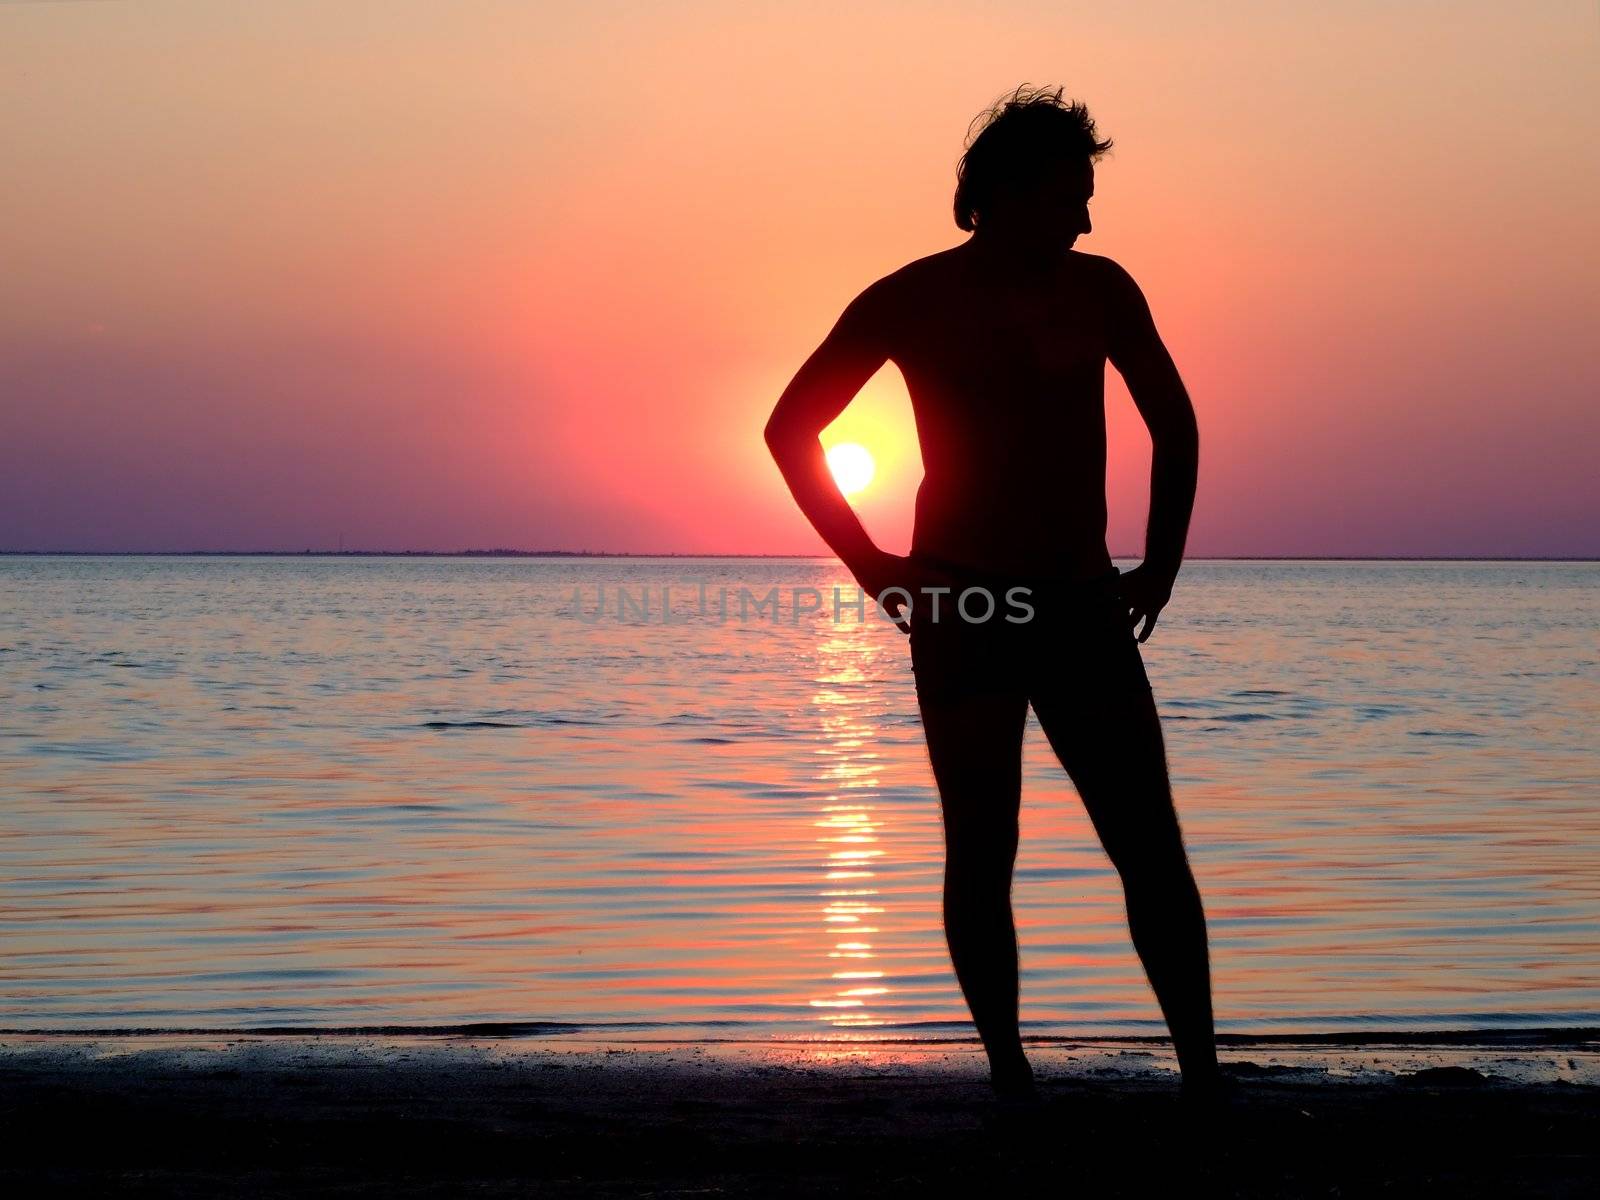 A black silhouette of a young guy on a sunset 2 by acidgrey